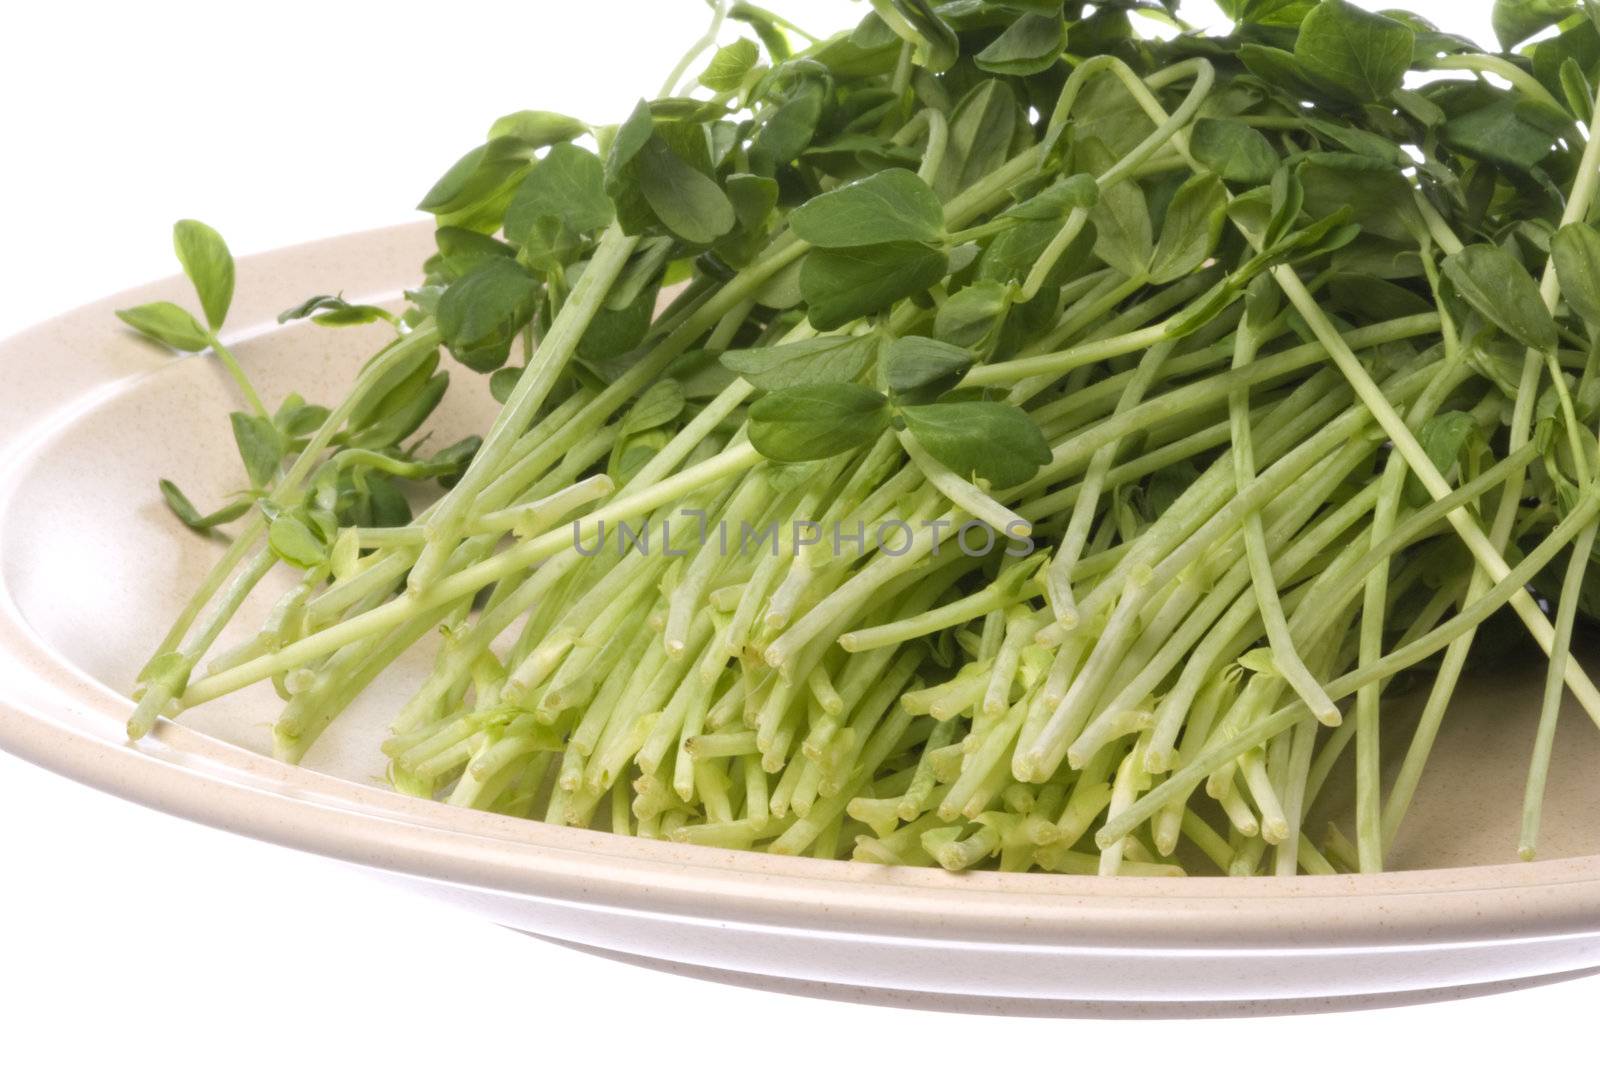 Isolated image of snow pea sprouts on a plate.